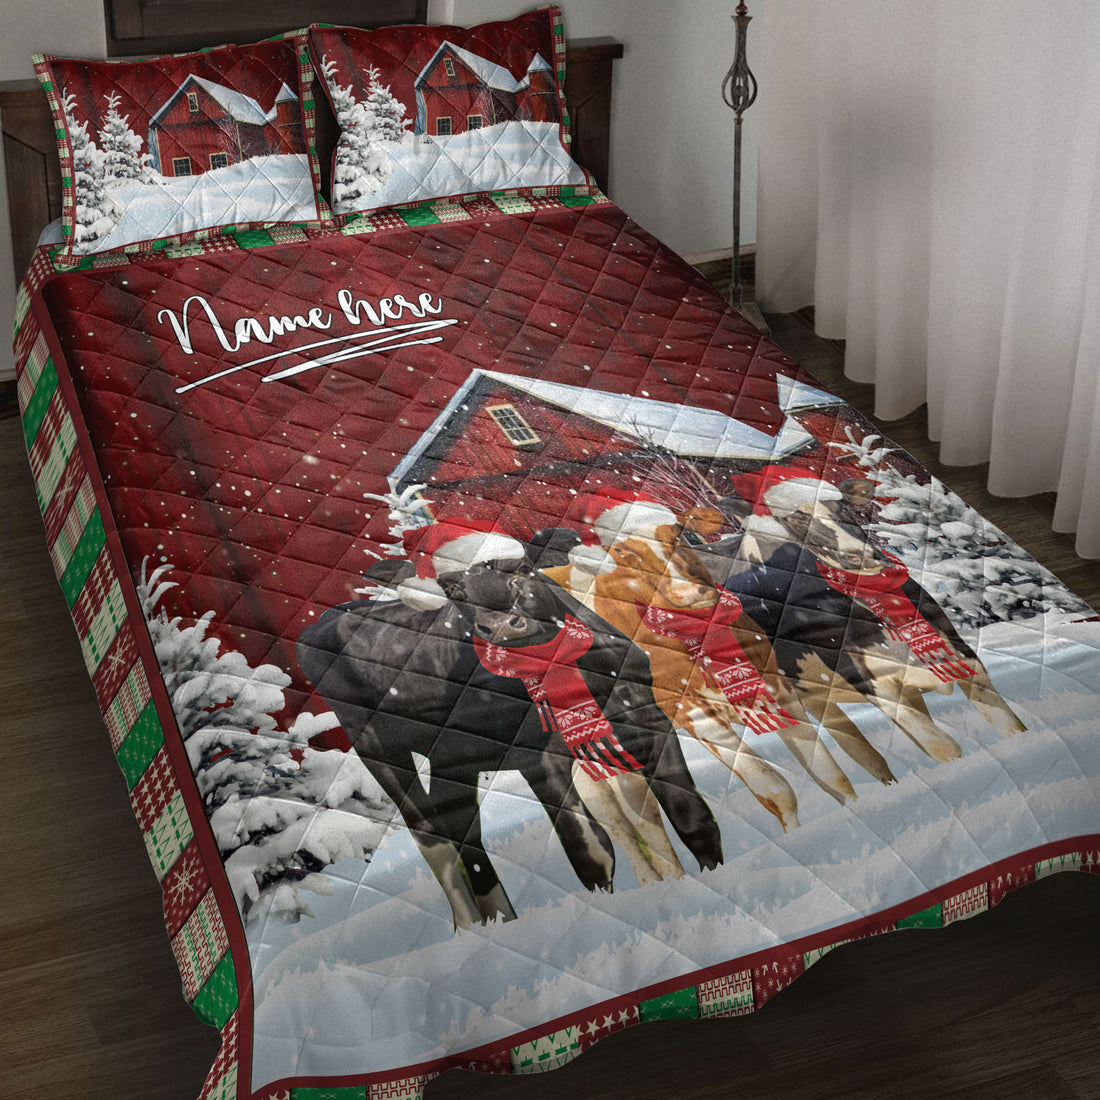 Ohaprints-Quilt-Bed-Set-Pillowcase-Cow-With-String-Lights-Christmas-Tree-Snowdrift-Blanket-Bedspread-Bedding-4035-Throw (55'' x 60'')